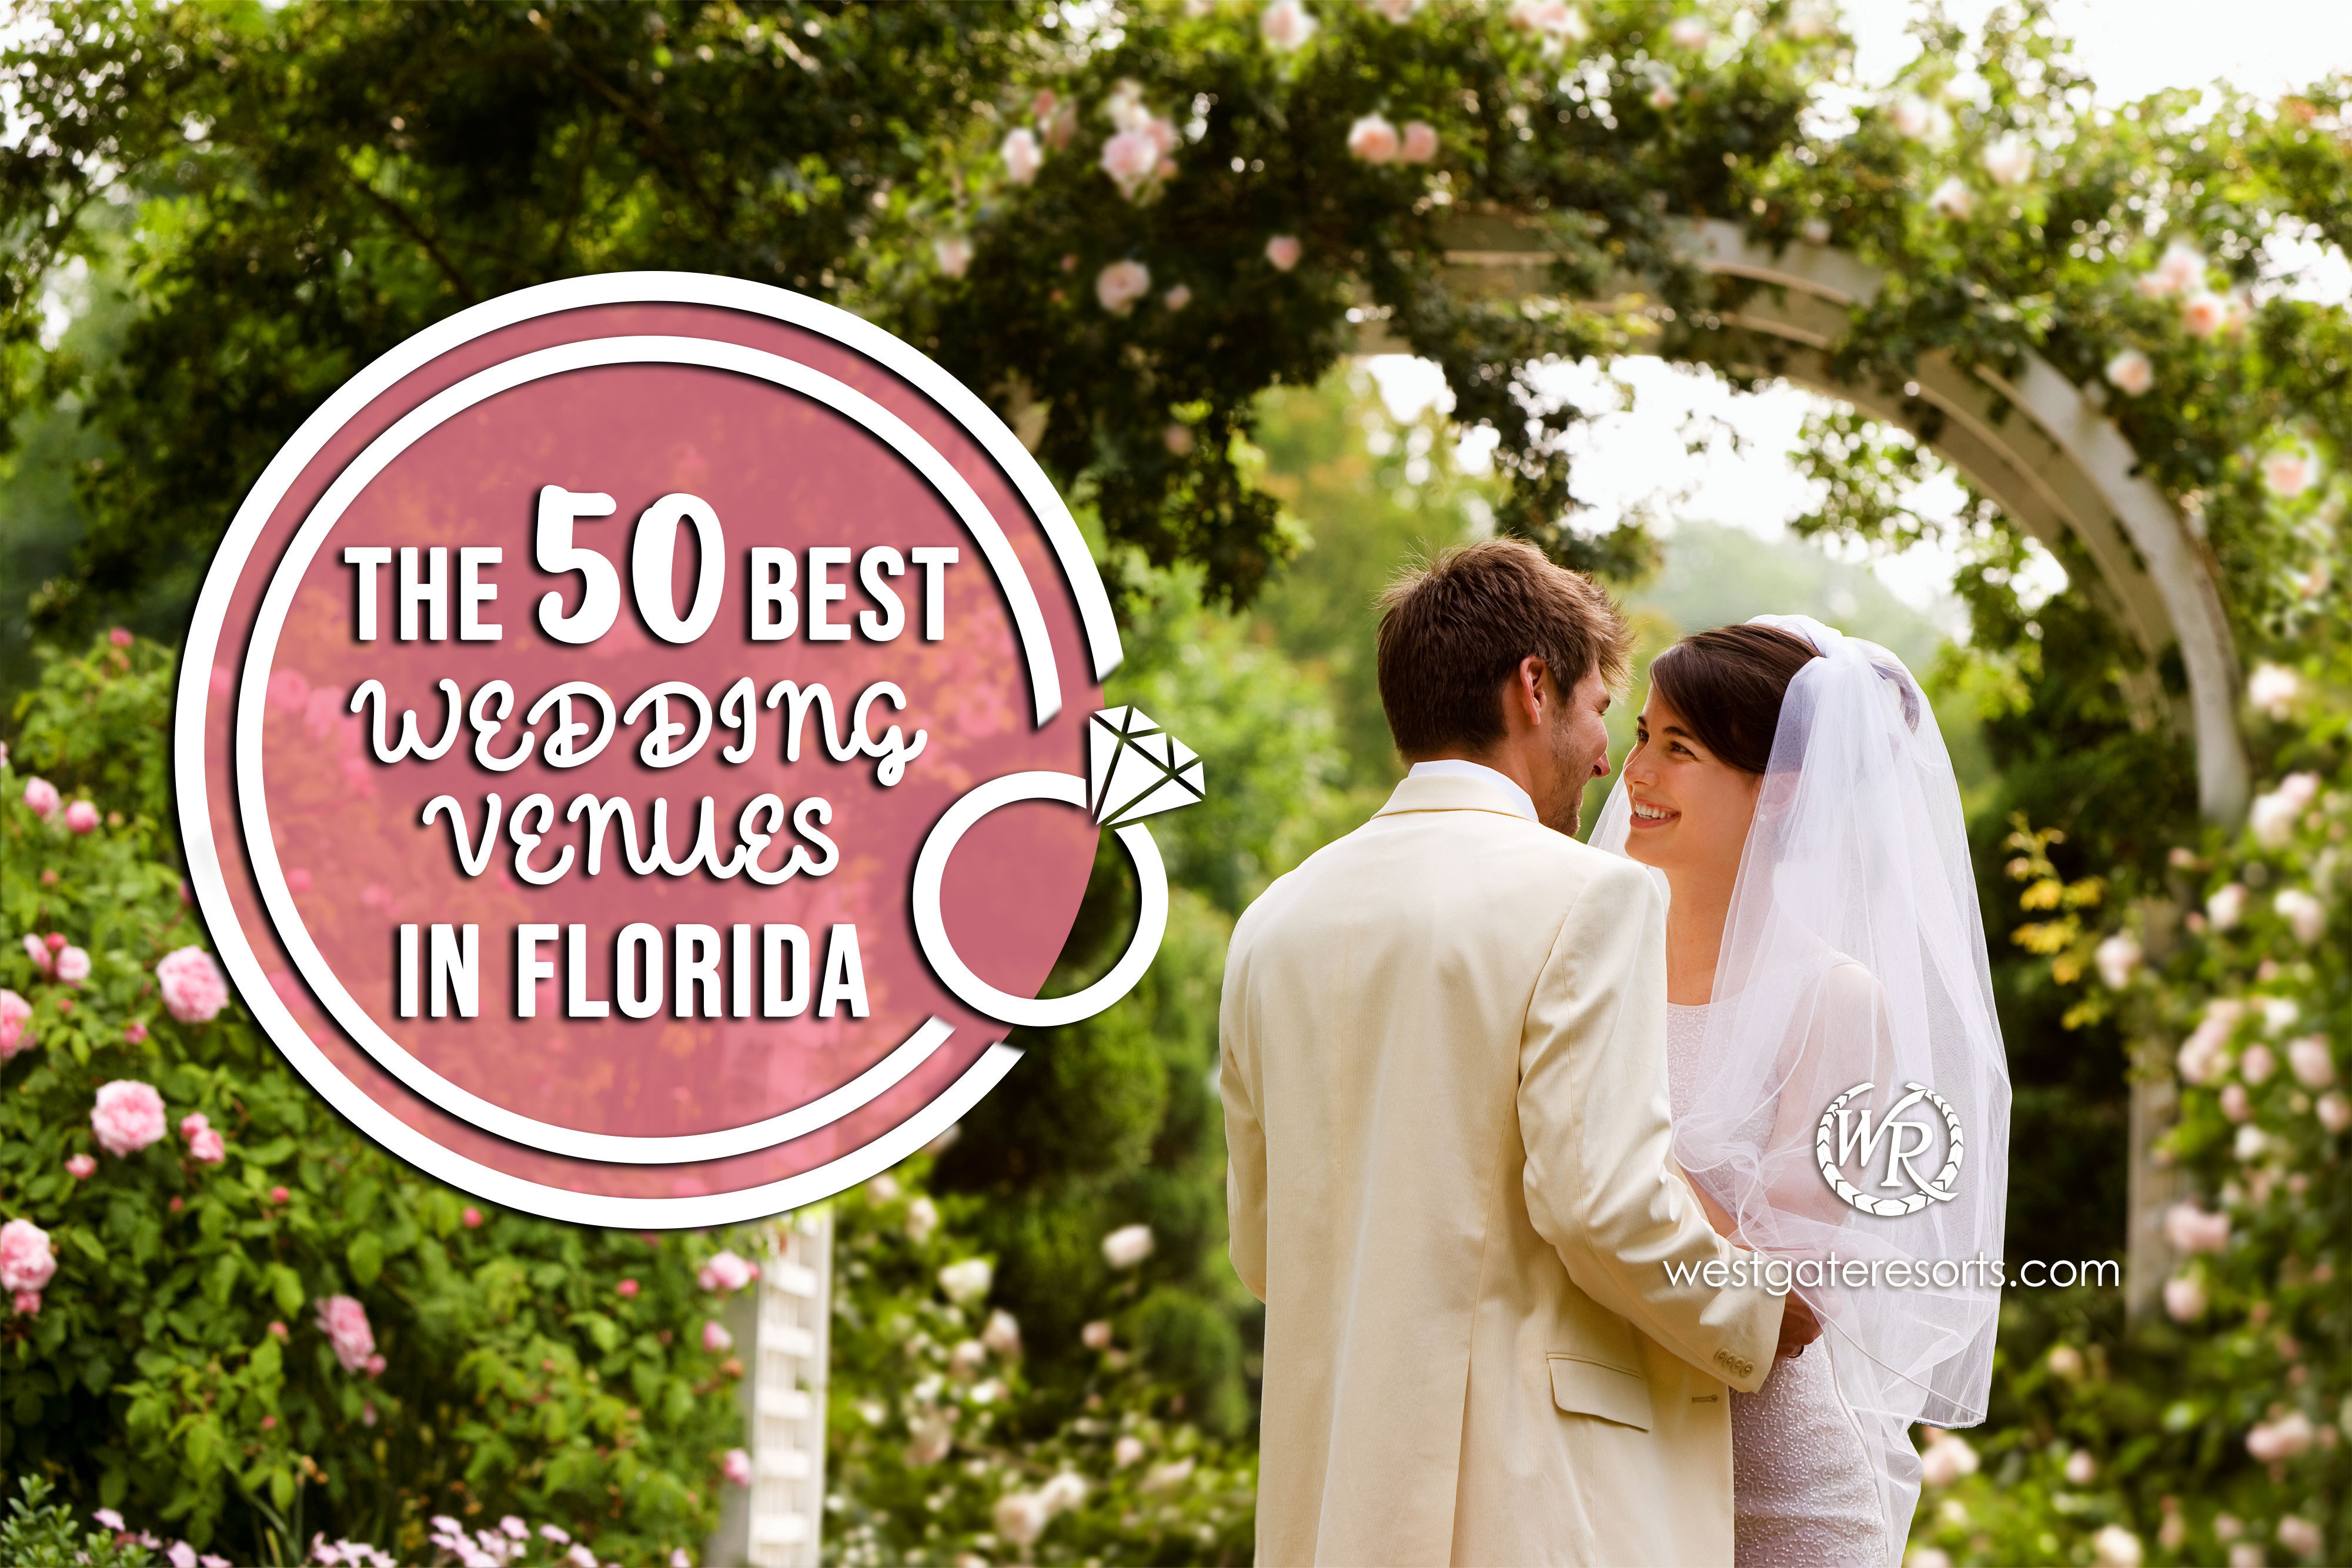 The 50 Best Wedding Venues in Florida